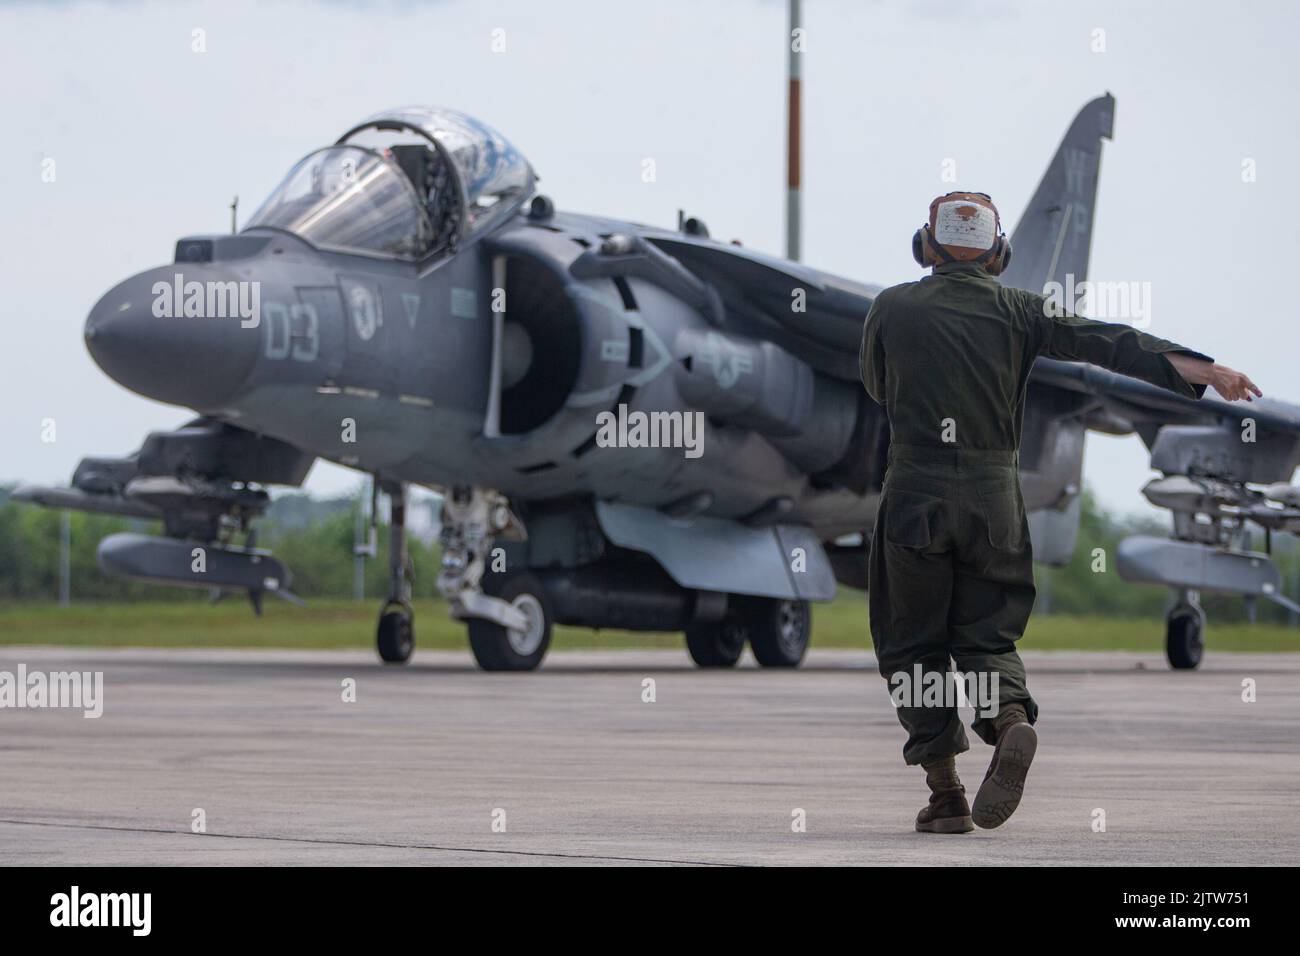 U.S. Marines with Marine Attack Squadron (VMA) 223 taxi an AV-8B Harrier II jet at Marine Corps Air Station Cherry Point, North Carolina, Aug. 31, 2022. AV-8B Harrier II jets assigned to VMA-223 were loaded with AIM-120A missiles and ADM-141A Tactical Air-Launched Decoys for the pilots to practice air-to-air combat. VMA-223 is a subordinate unit of 2nd Marine Aircraft Wing, the aviation combat element of II Marine Expeditionary Force. (U.S. Marine Corps photo by Lance Cpl. Elias E. Pimentel III) Stock Photo